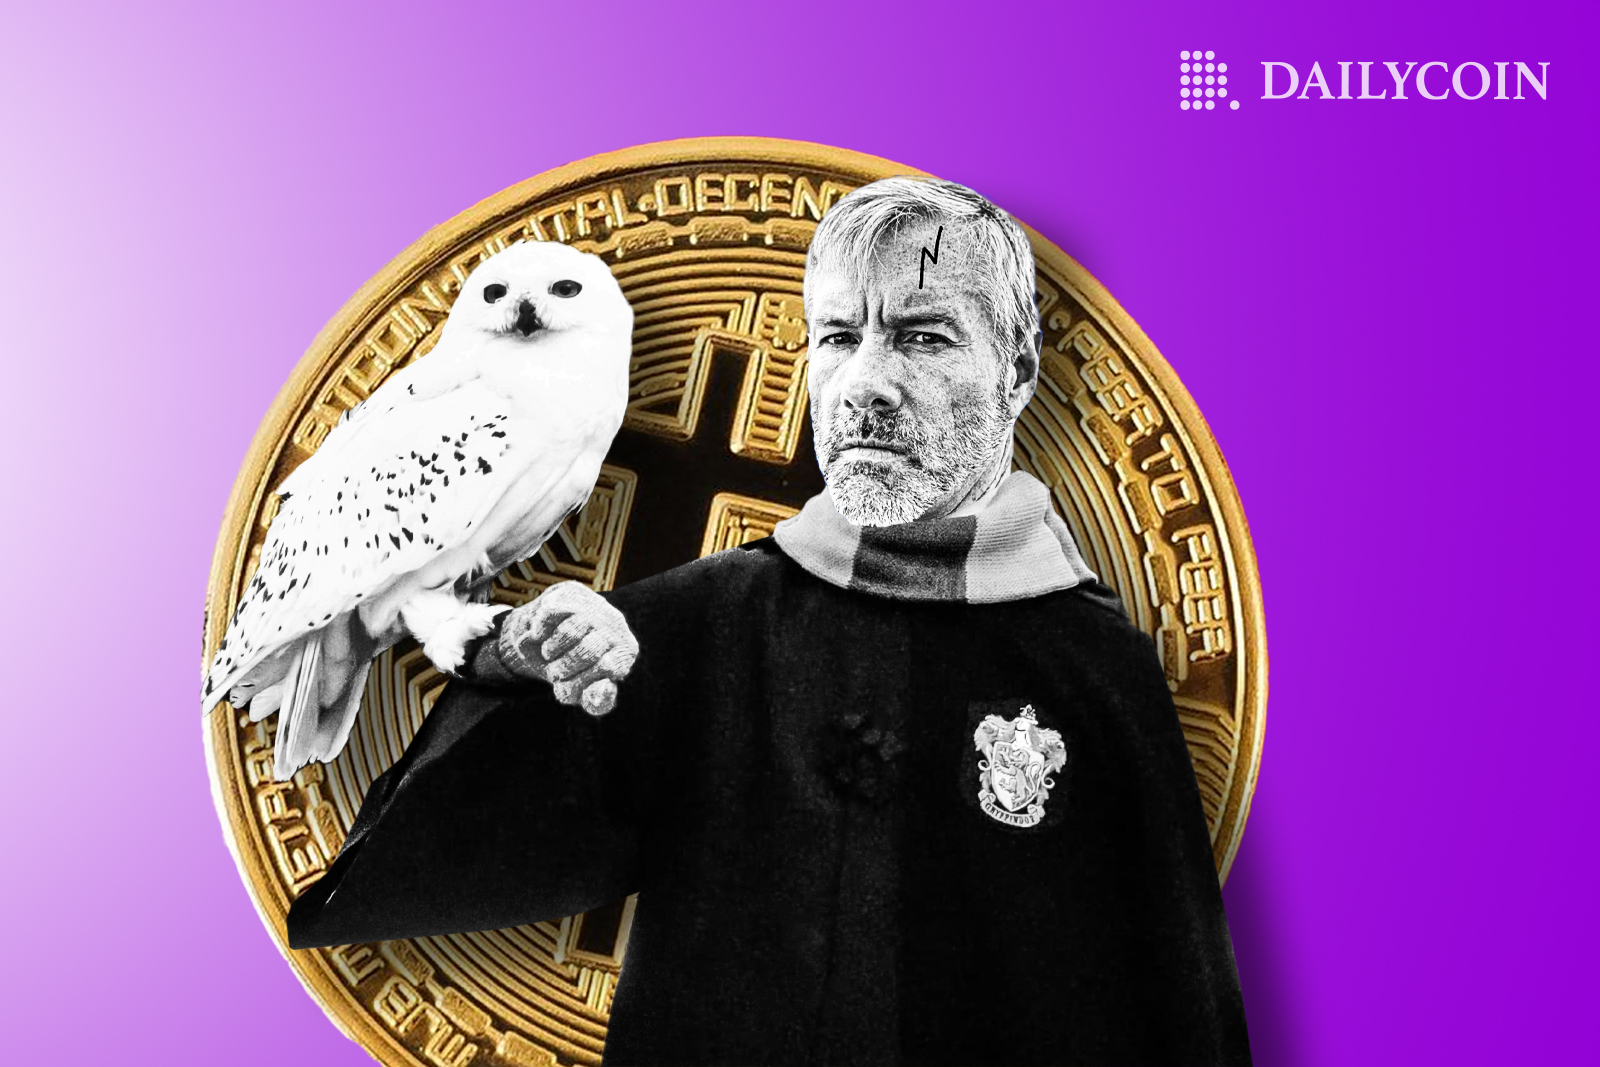 Michael Saylor wearing Gryffindor uniform holding an owl in front of a giant Bitcoin BTC coin